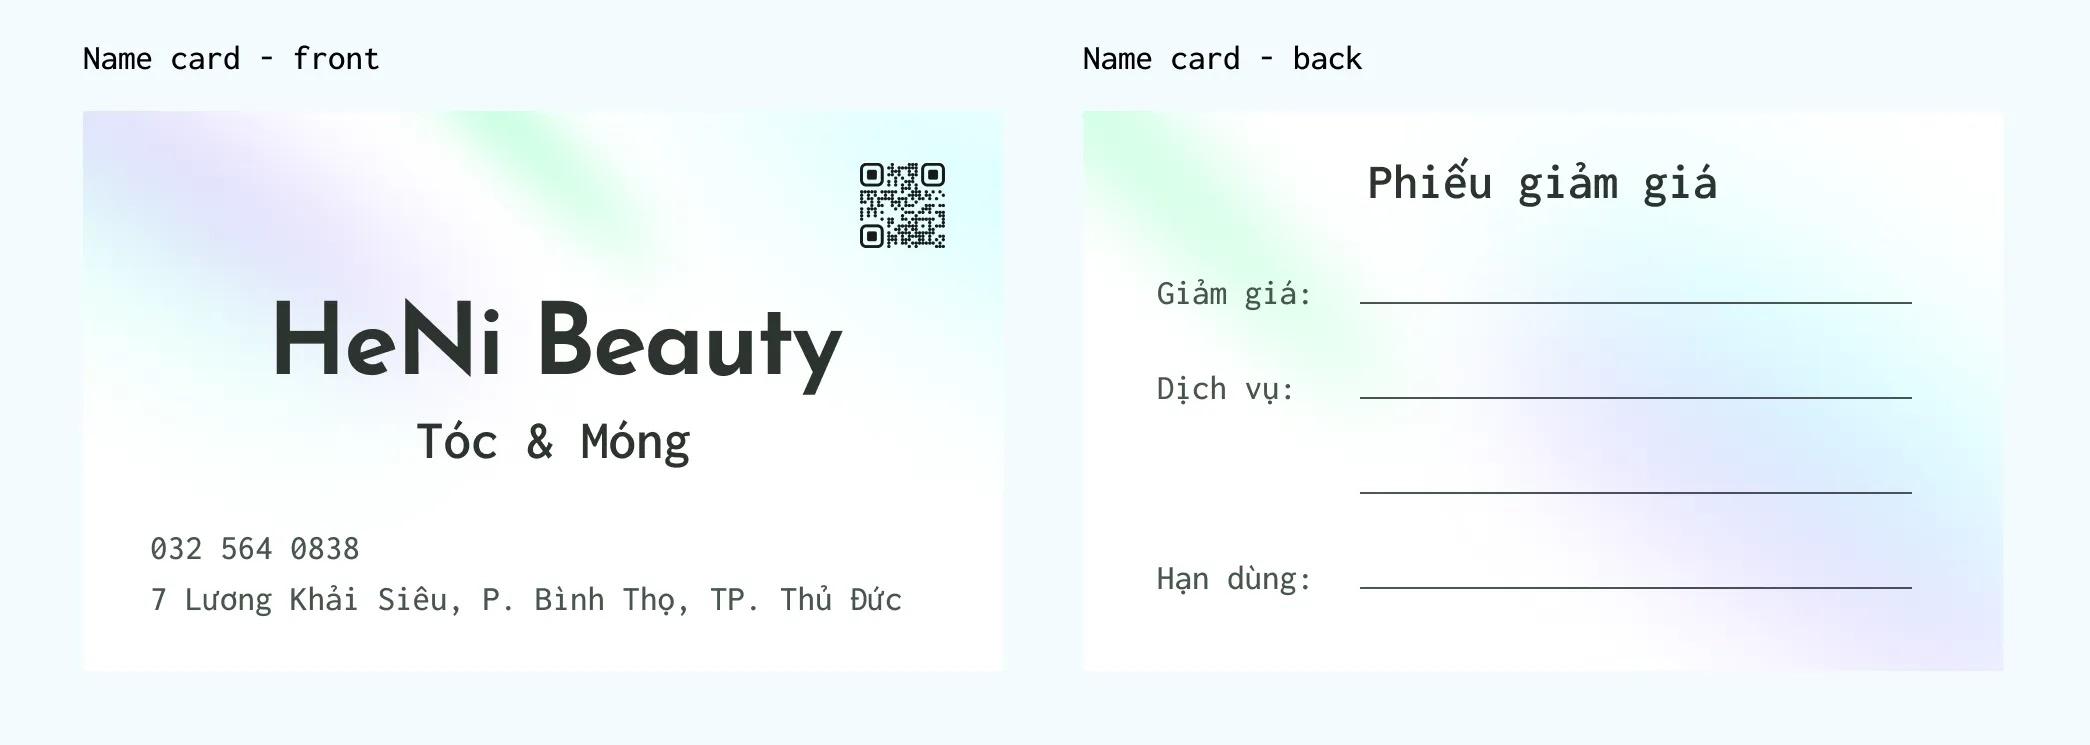 HeNi Beauty name card front side and back side